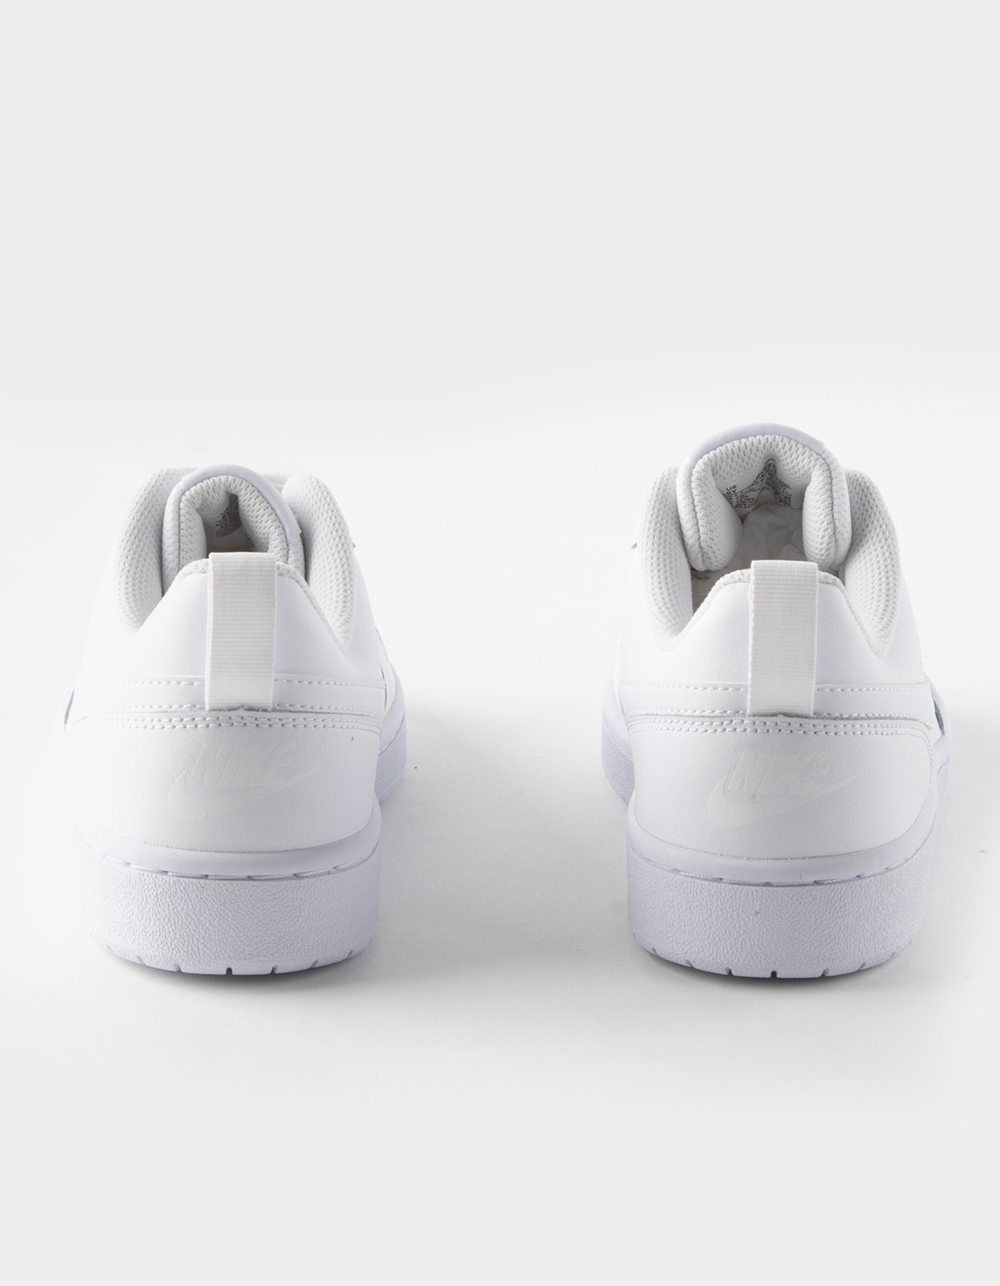 Dageraad musical Referendum NIKE Court Borough Low 2 Kids Shoes - WHITE | Tillys